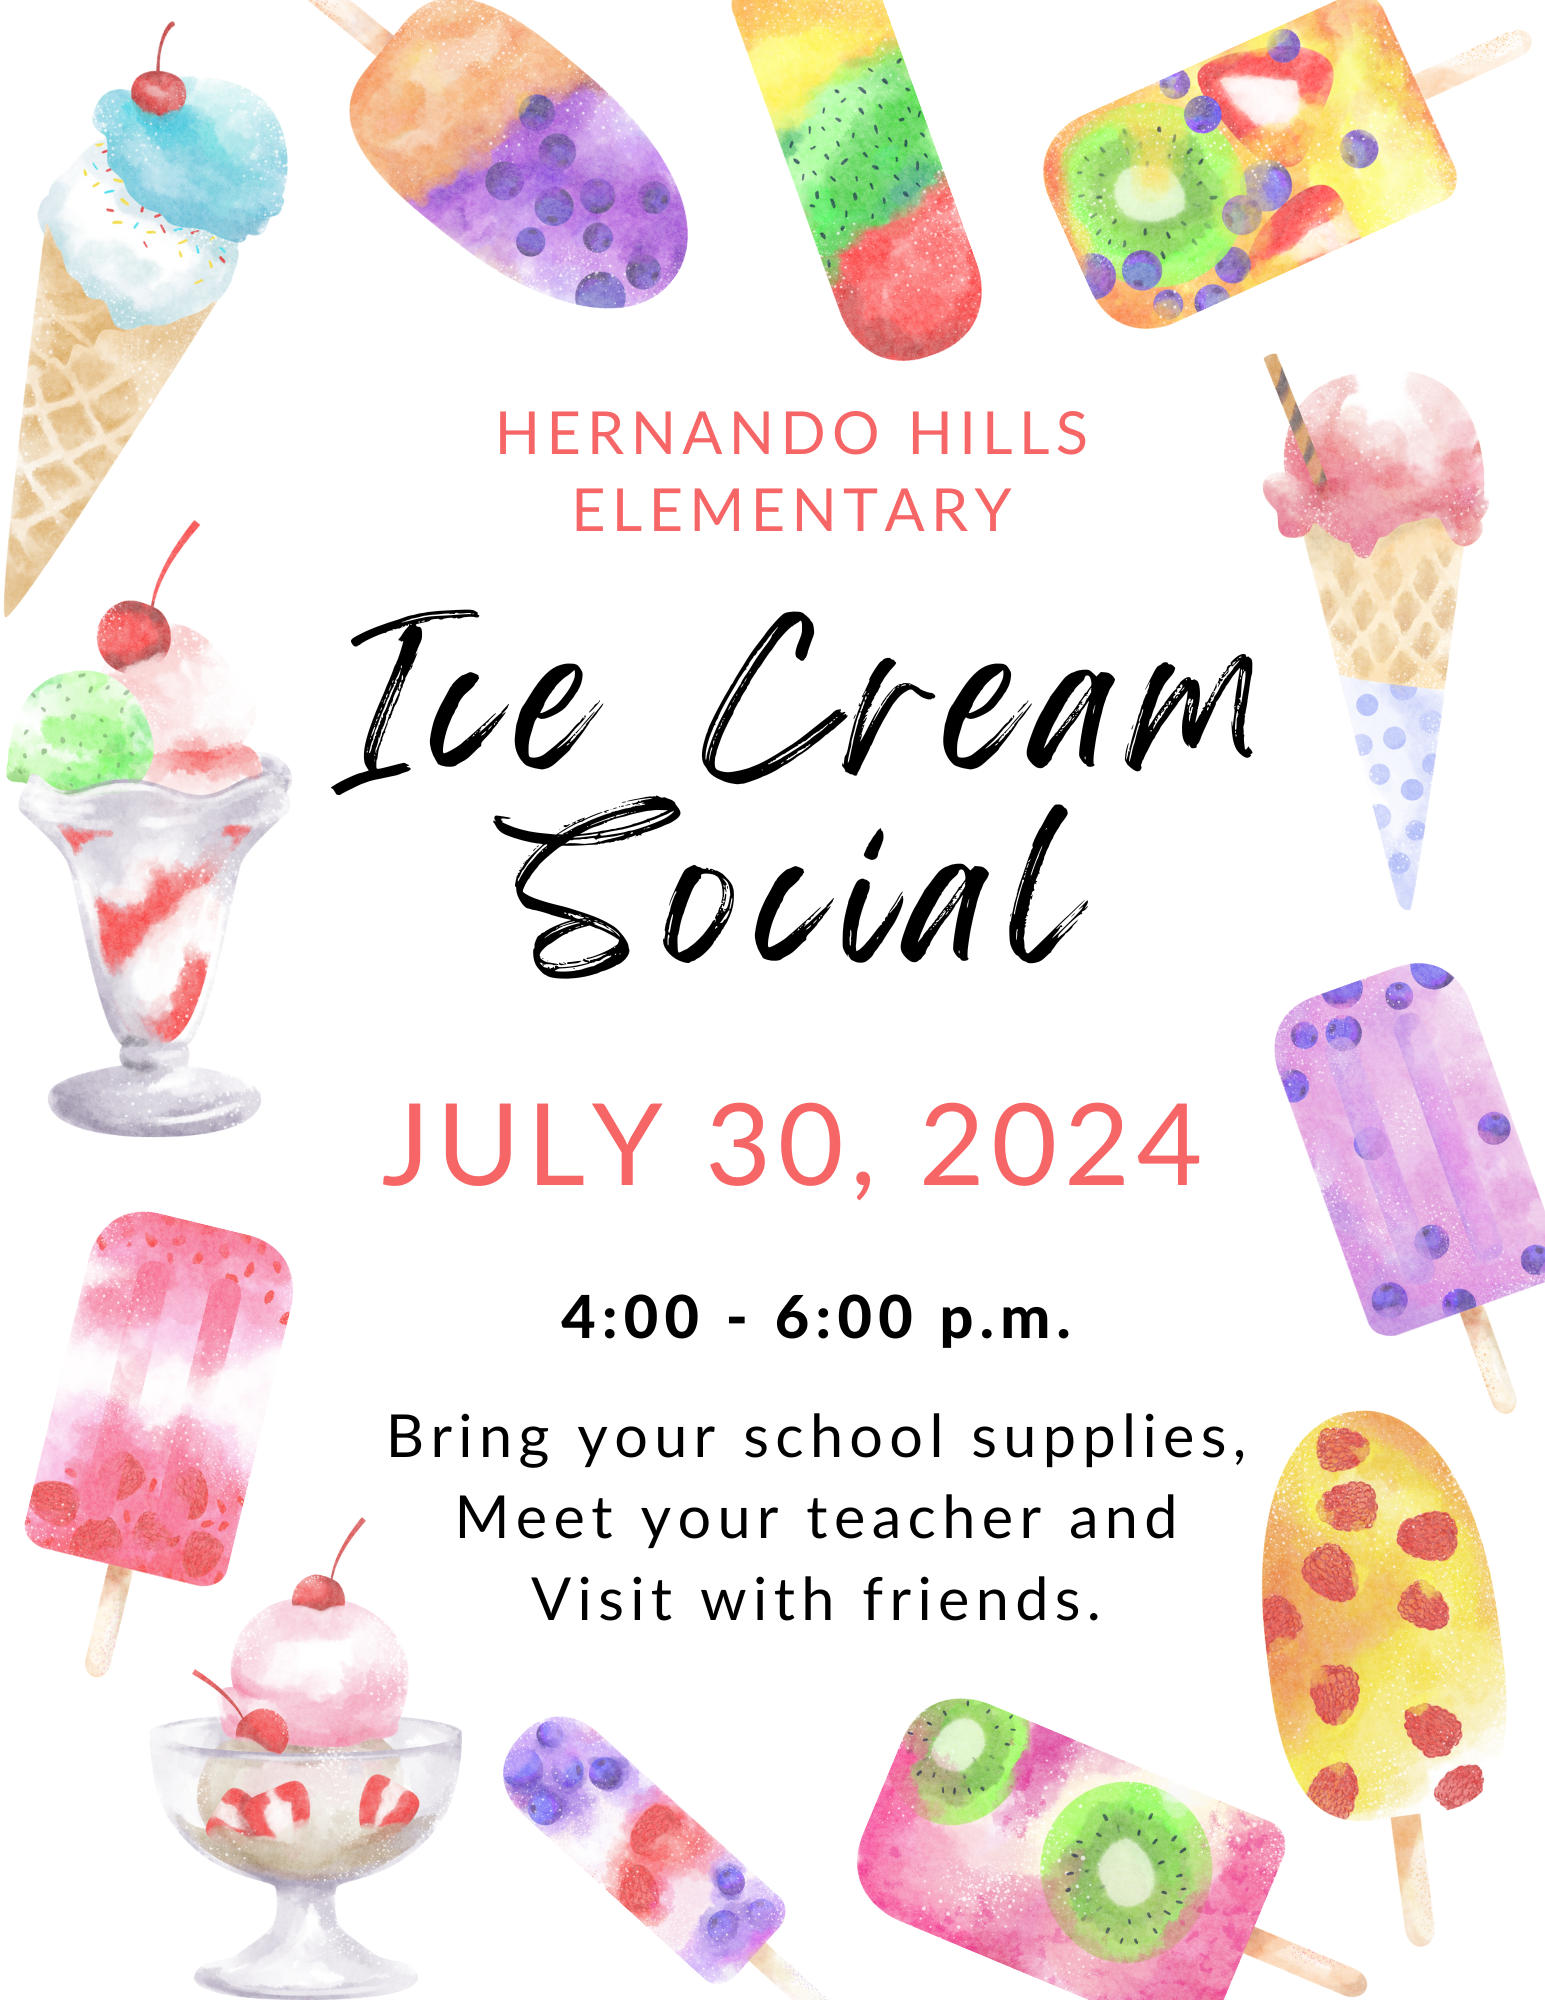 Hernando Hills Elementary Ice Cream Social July 30, 2024 4 to 6 pm  Bring your school supplies Meet your teacher and visit with friends